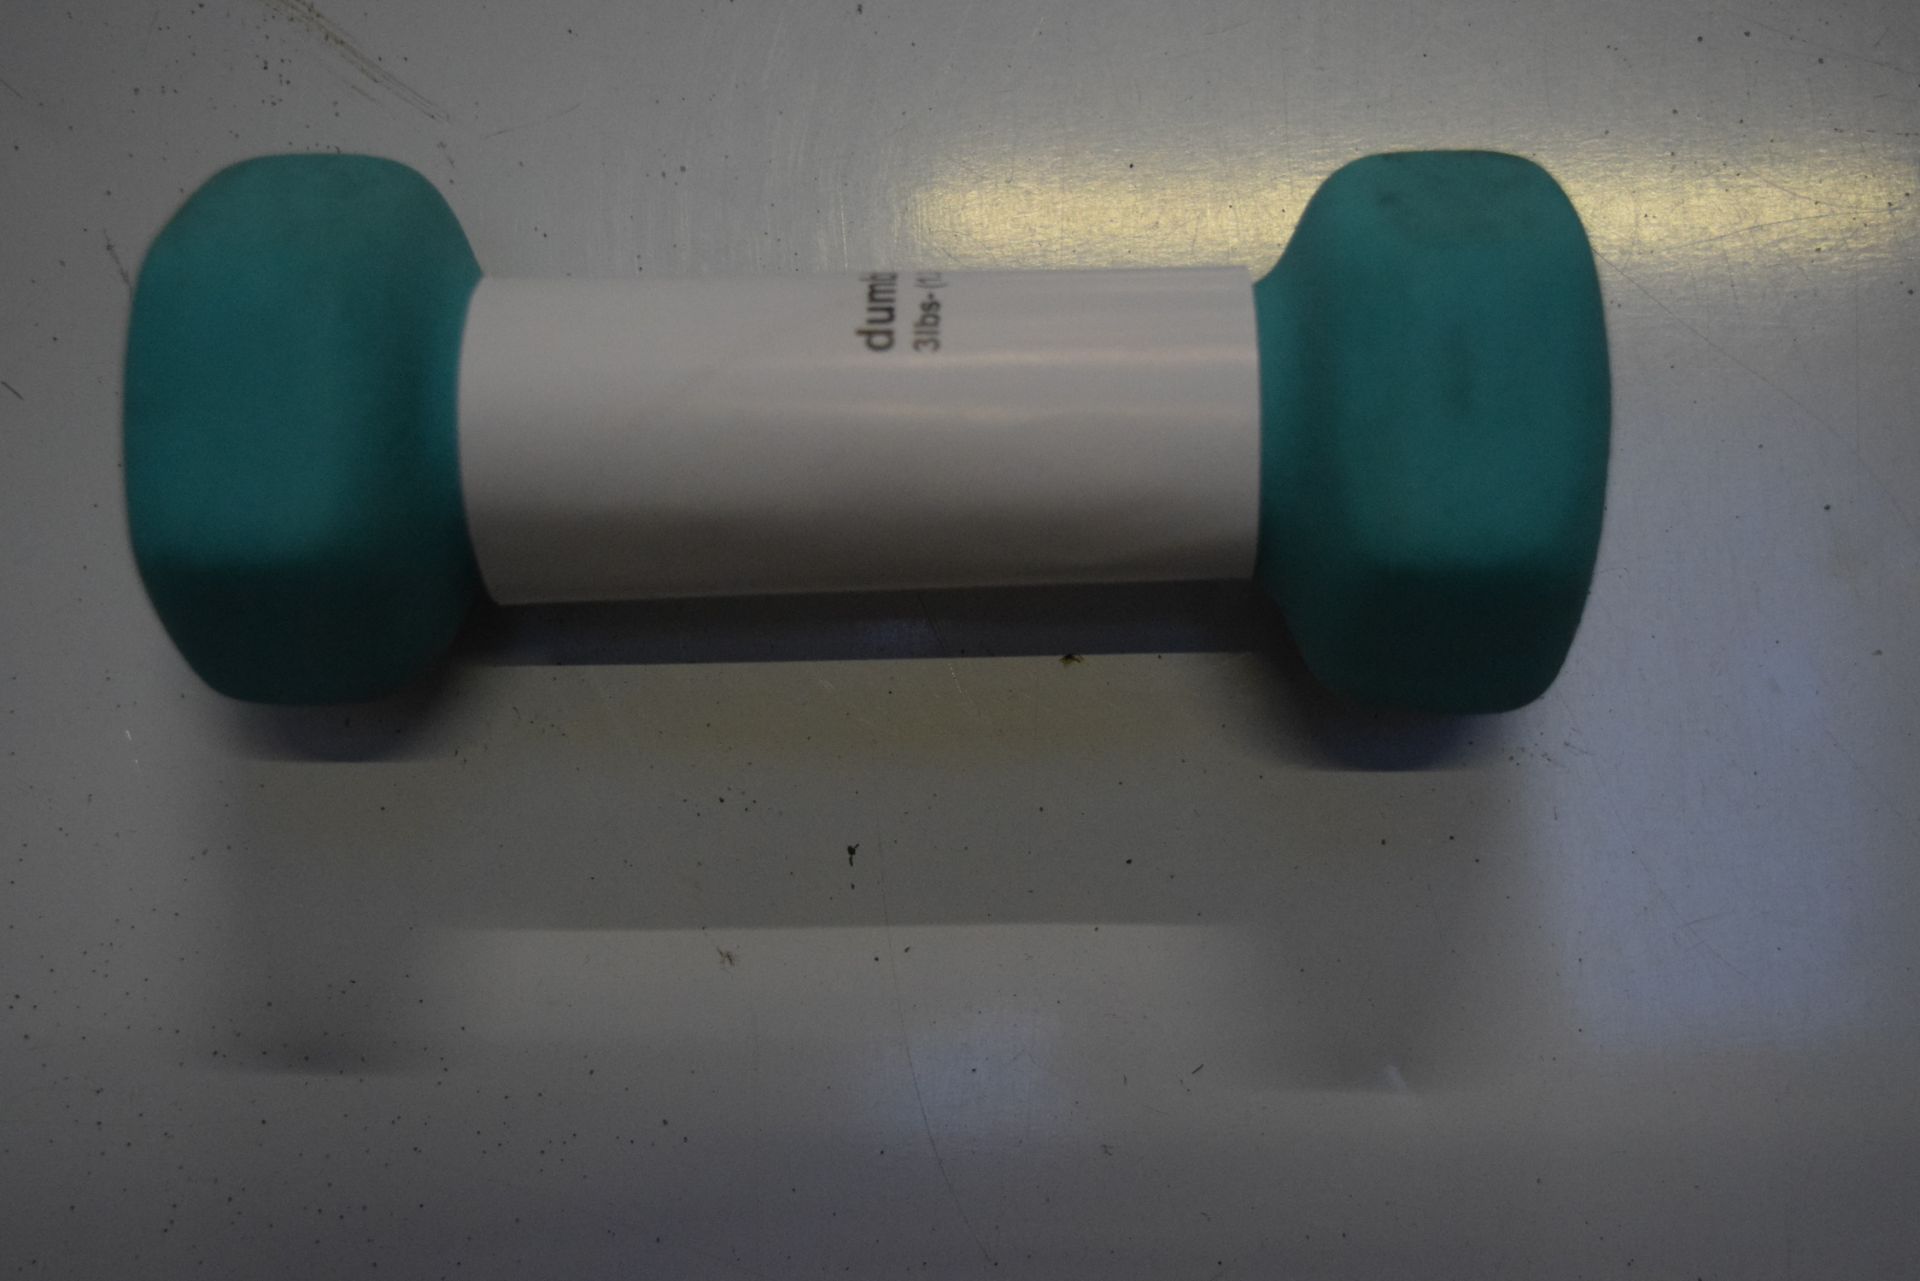 8 x 1.36KG DUMBELLS RRP £3 EACH 23/08/17 *PLEASE NOTE THAT THE BID PRICE IS MULTIPLIED BY THE NUMBER